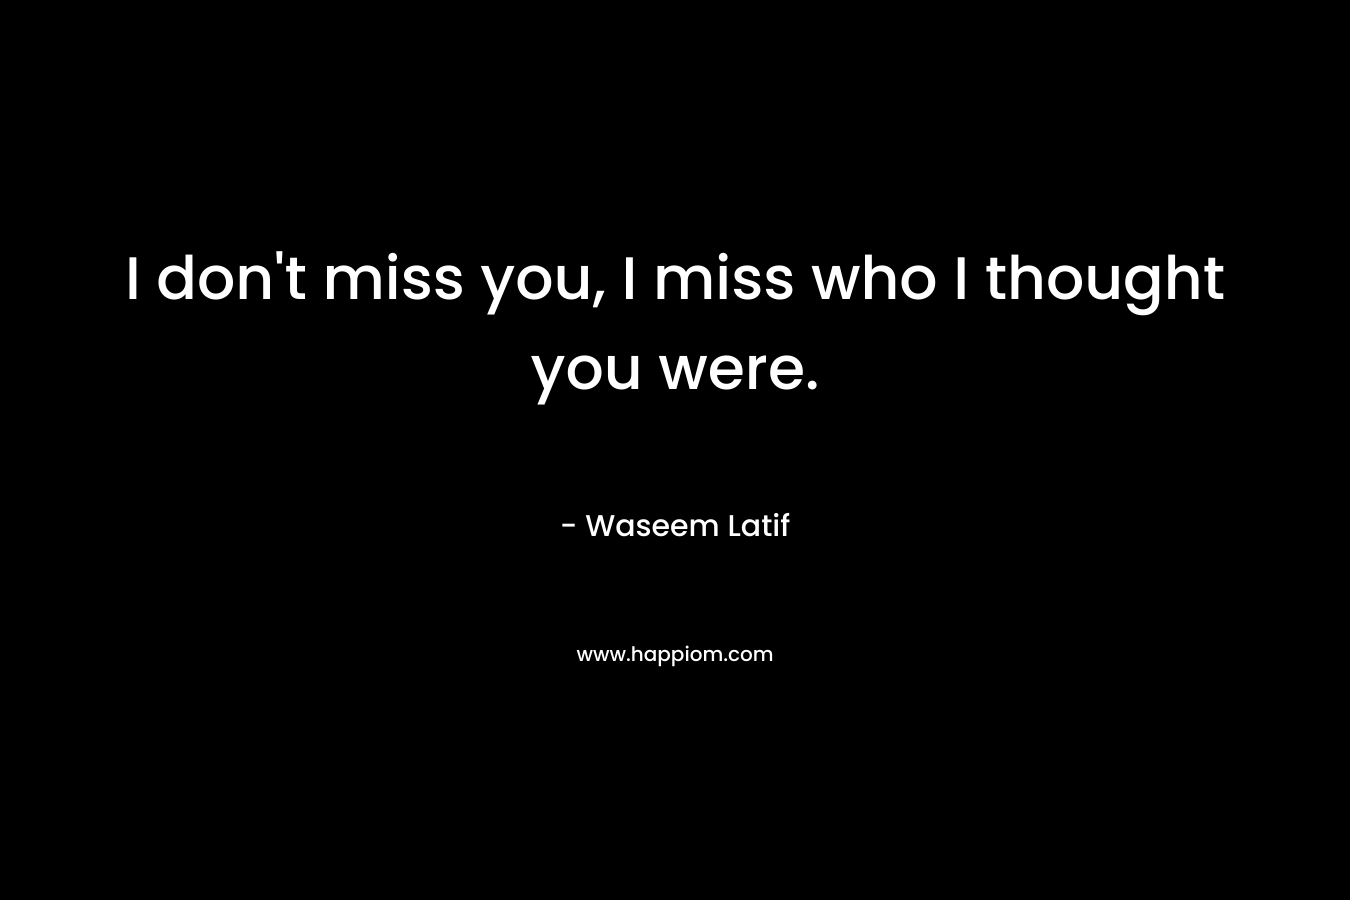 I don't miss you, I miss who I thought you were.